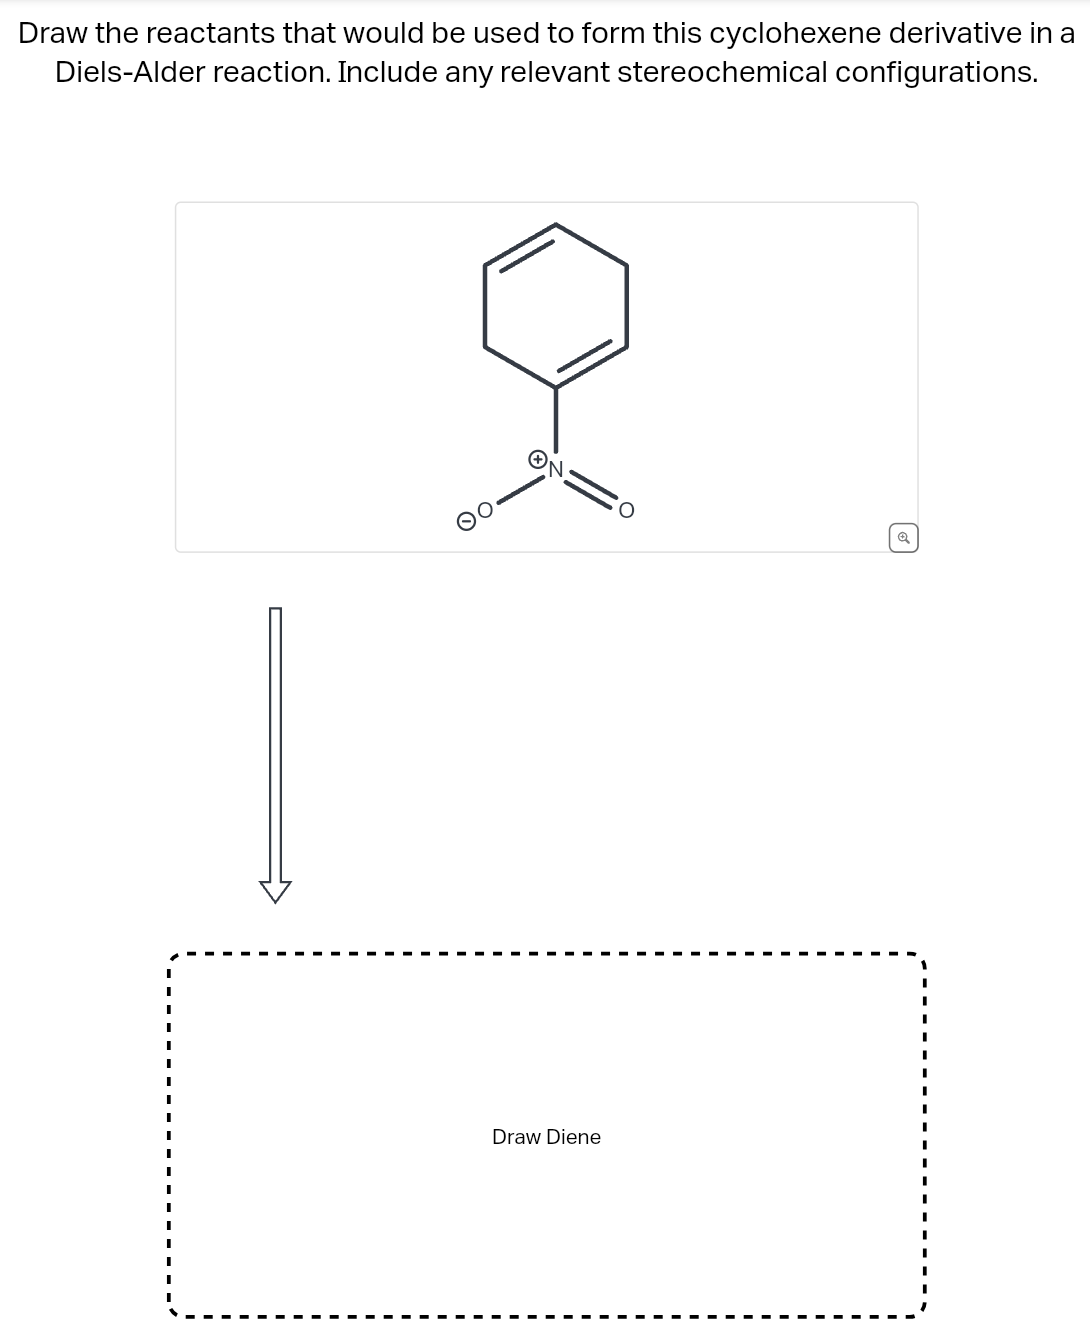 Draw the reactants that would be used to form this cyclohexene derivative in a
Diels-Alder reaction. Include any relevant stereochemical configurations.
오
Draw Diene